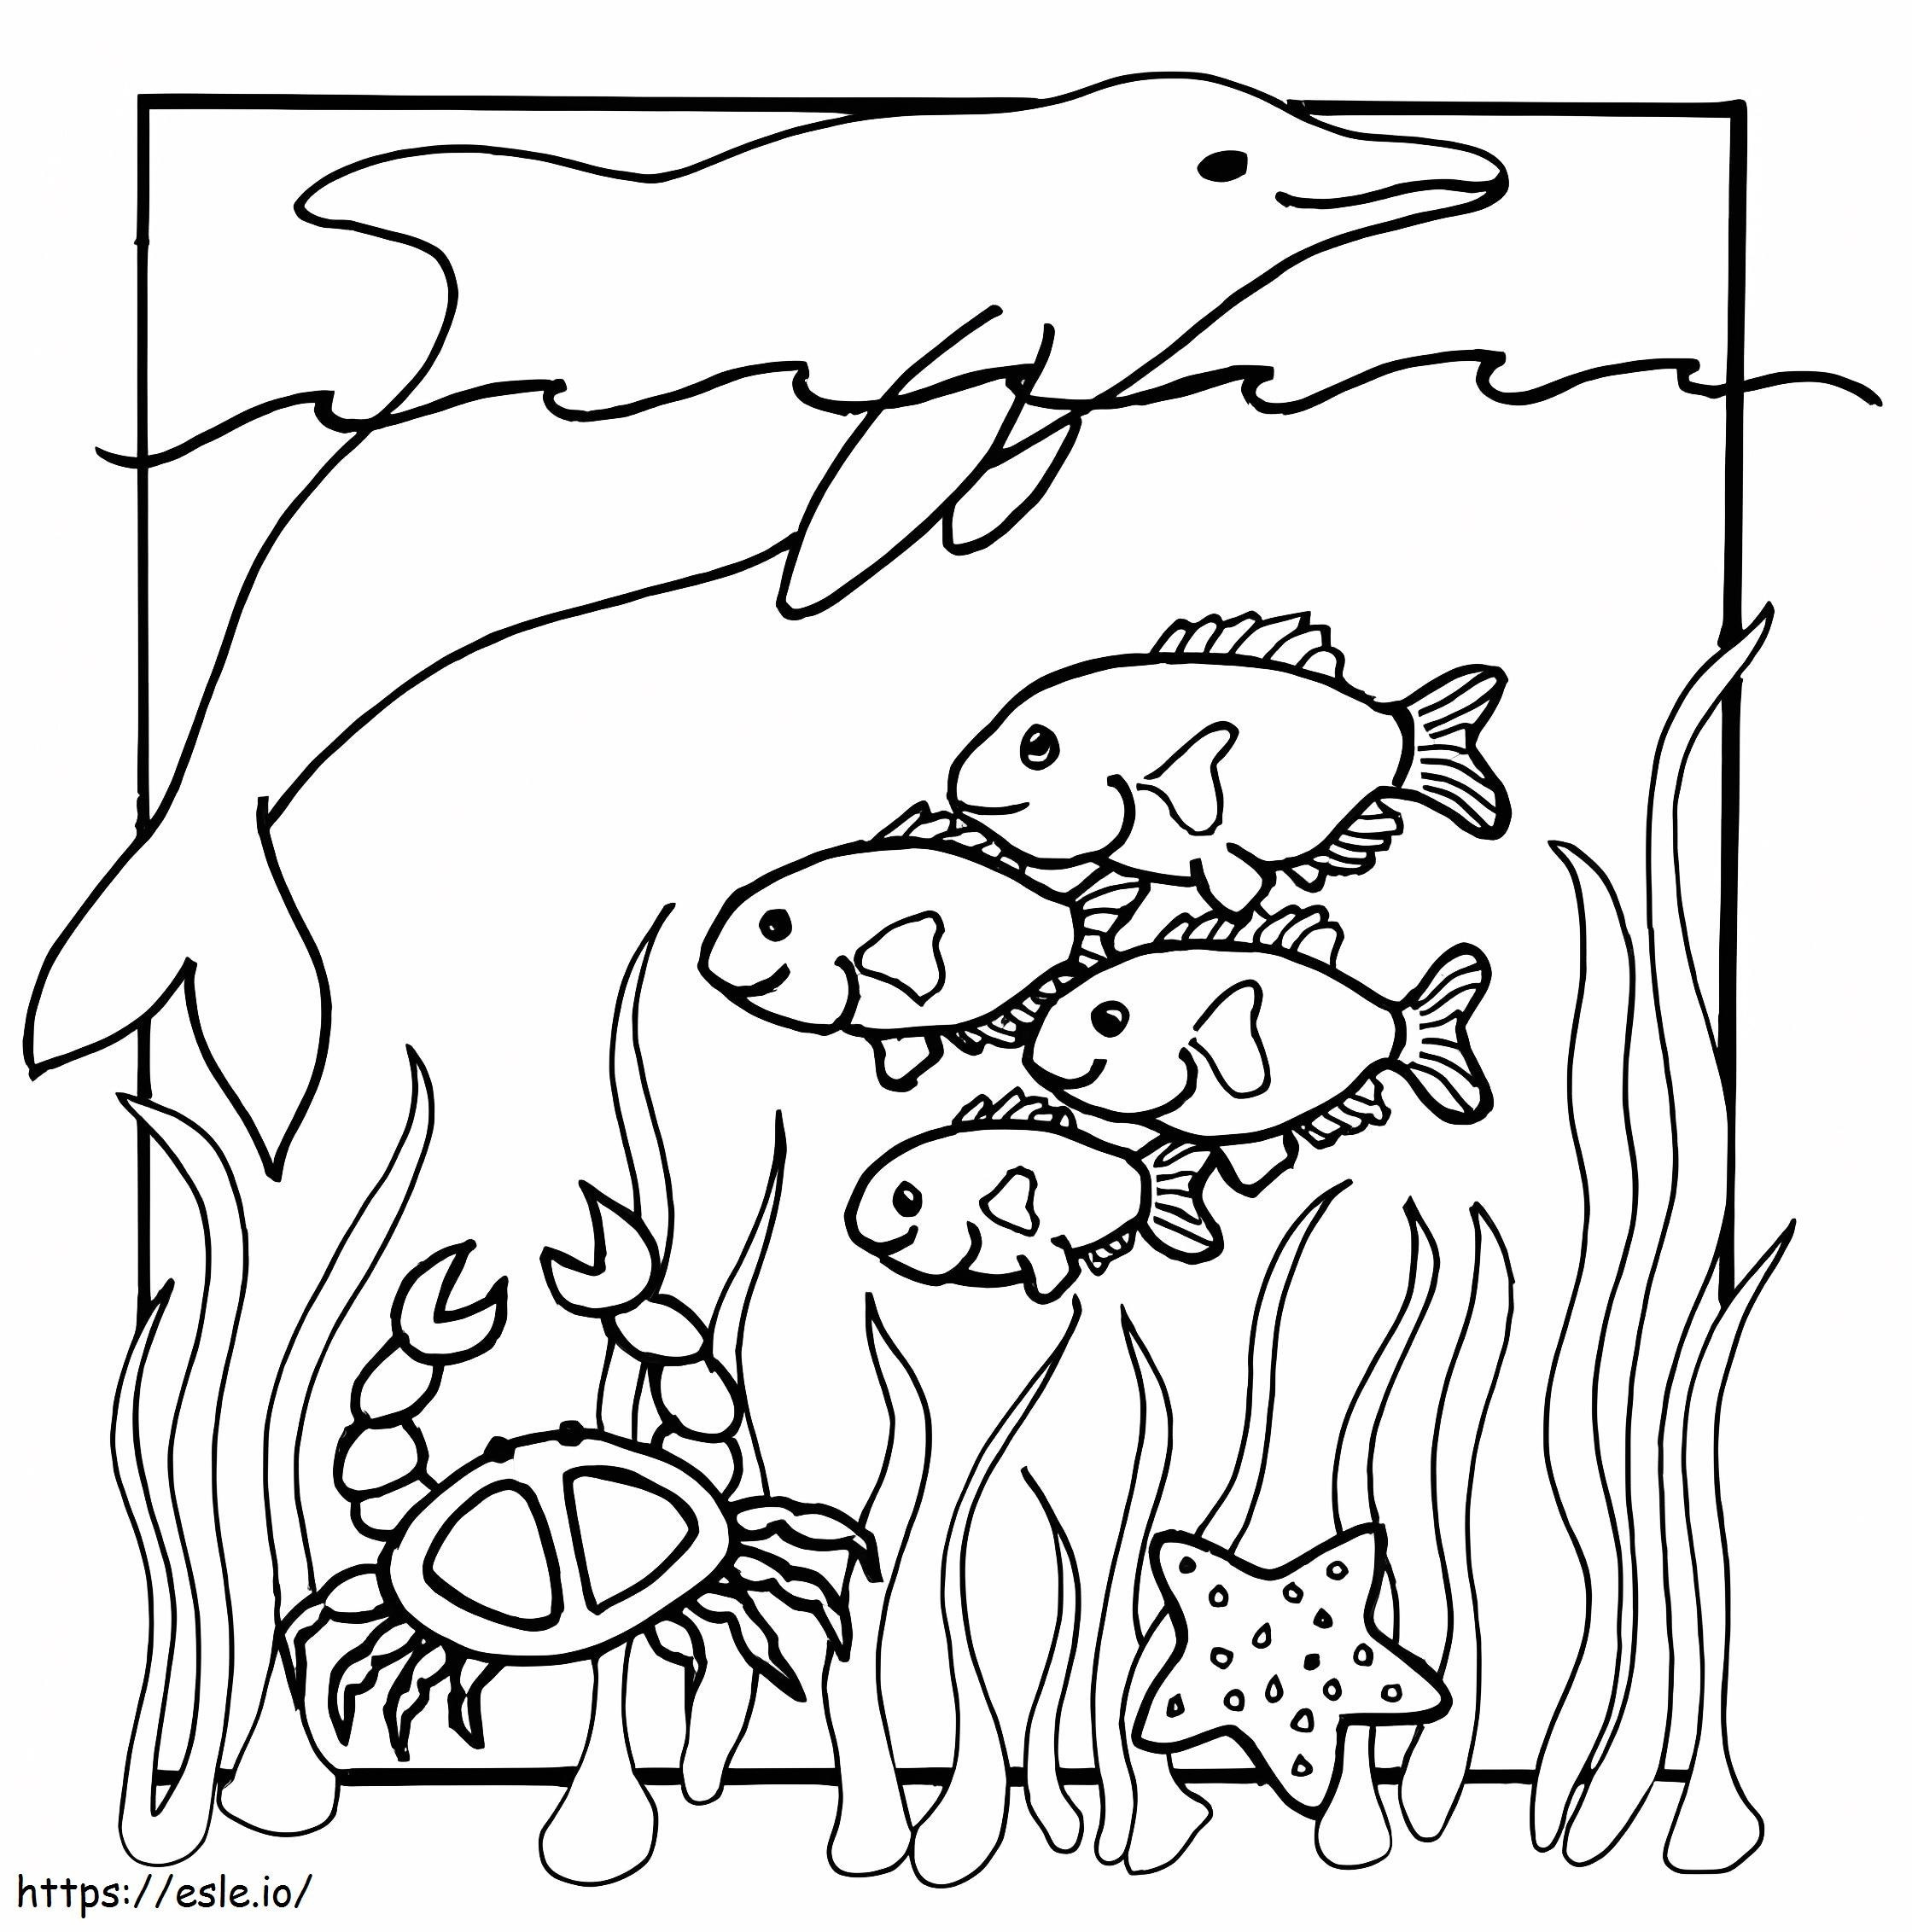 Under The Ocean coloring page